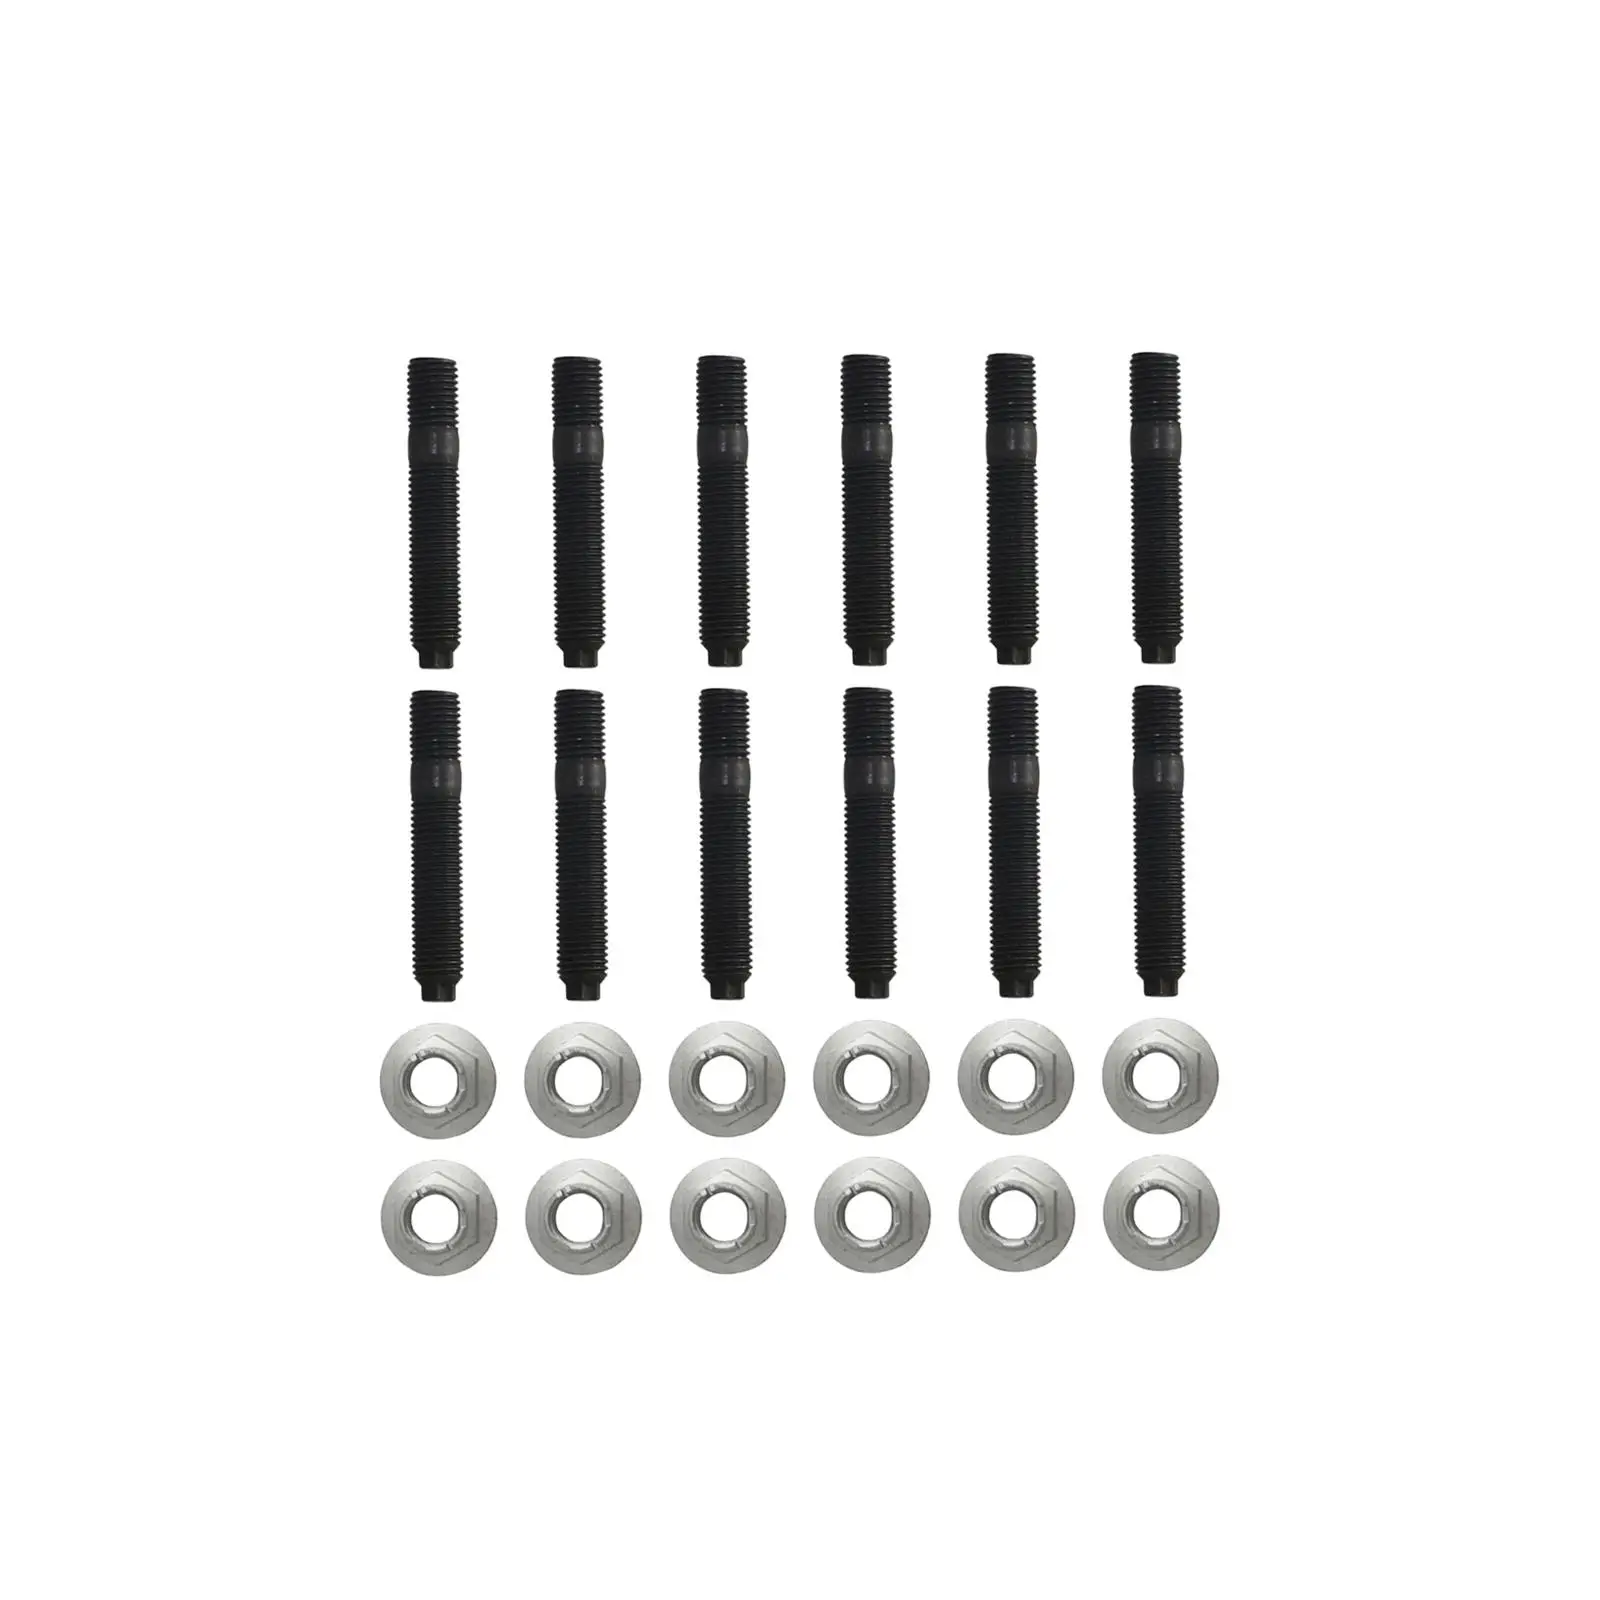 Exhaust Manifold Bolts and Nuts Premium Fitments 9017910128 Professional Exhaust Stud Kit for Toyota 1Hz 1hdt Vehicle 4.2L